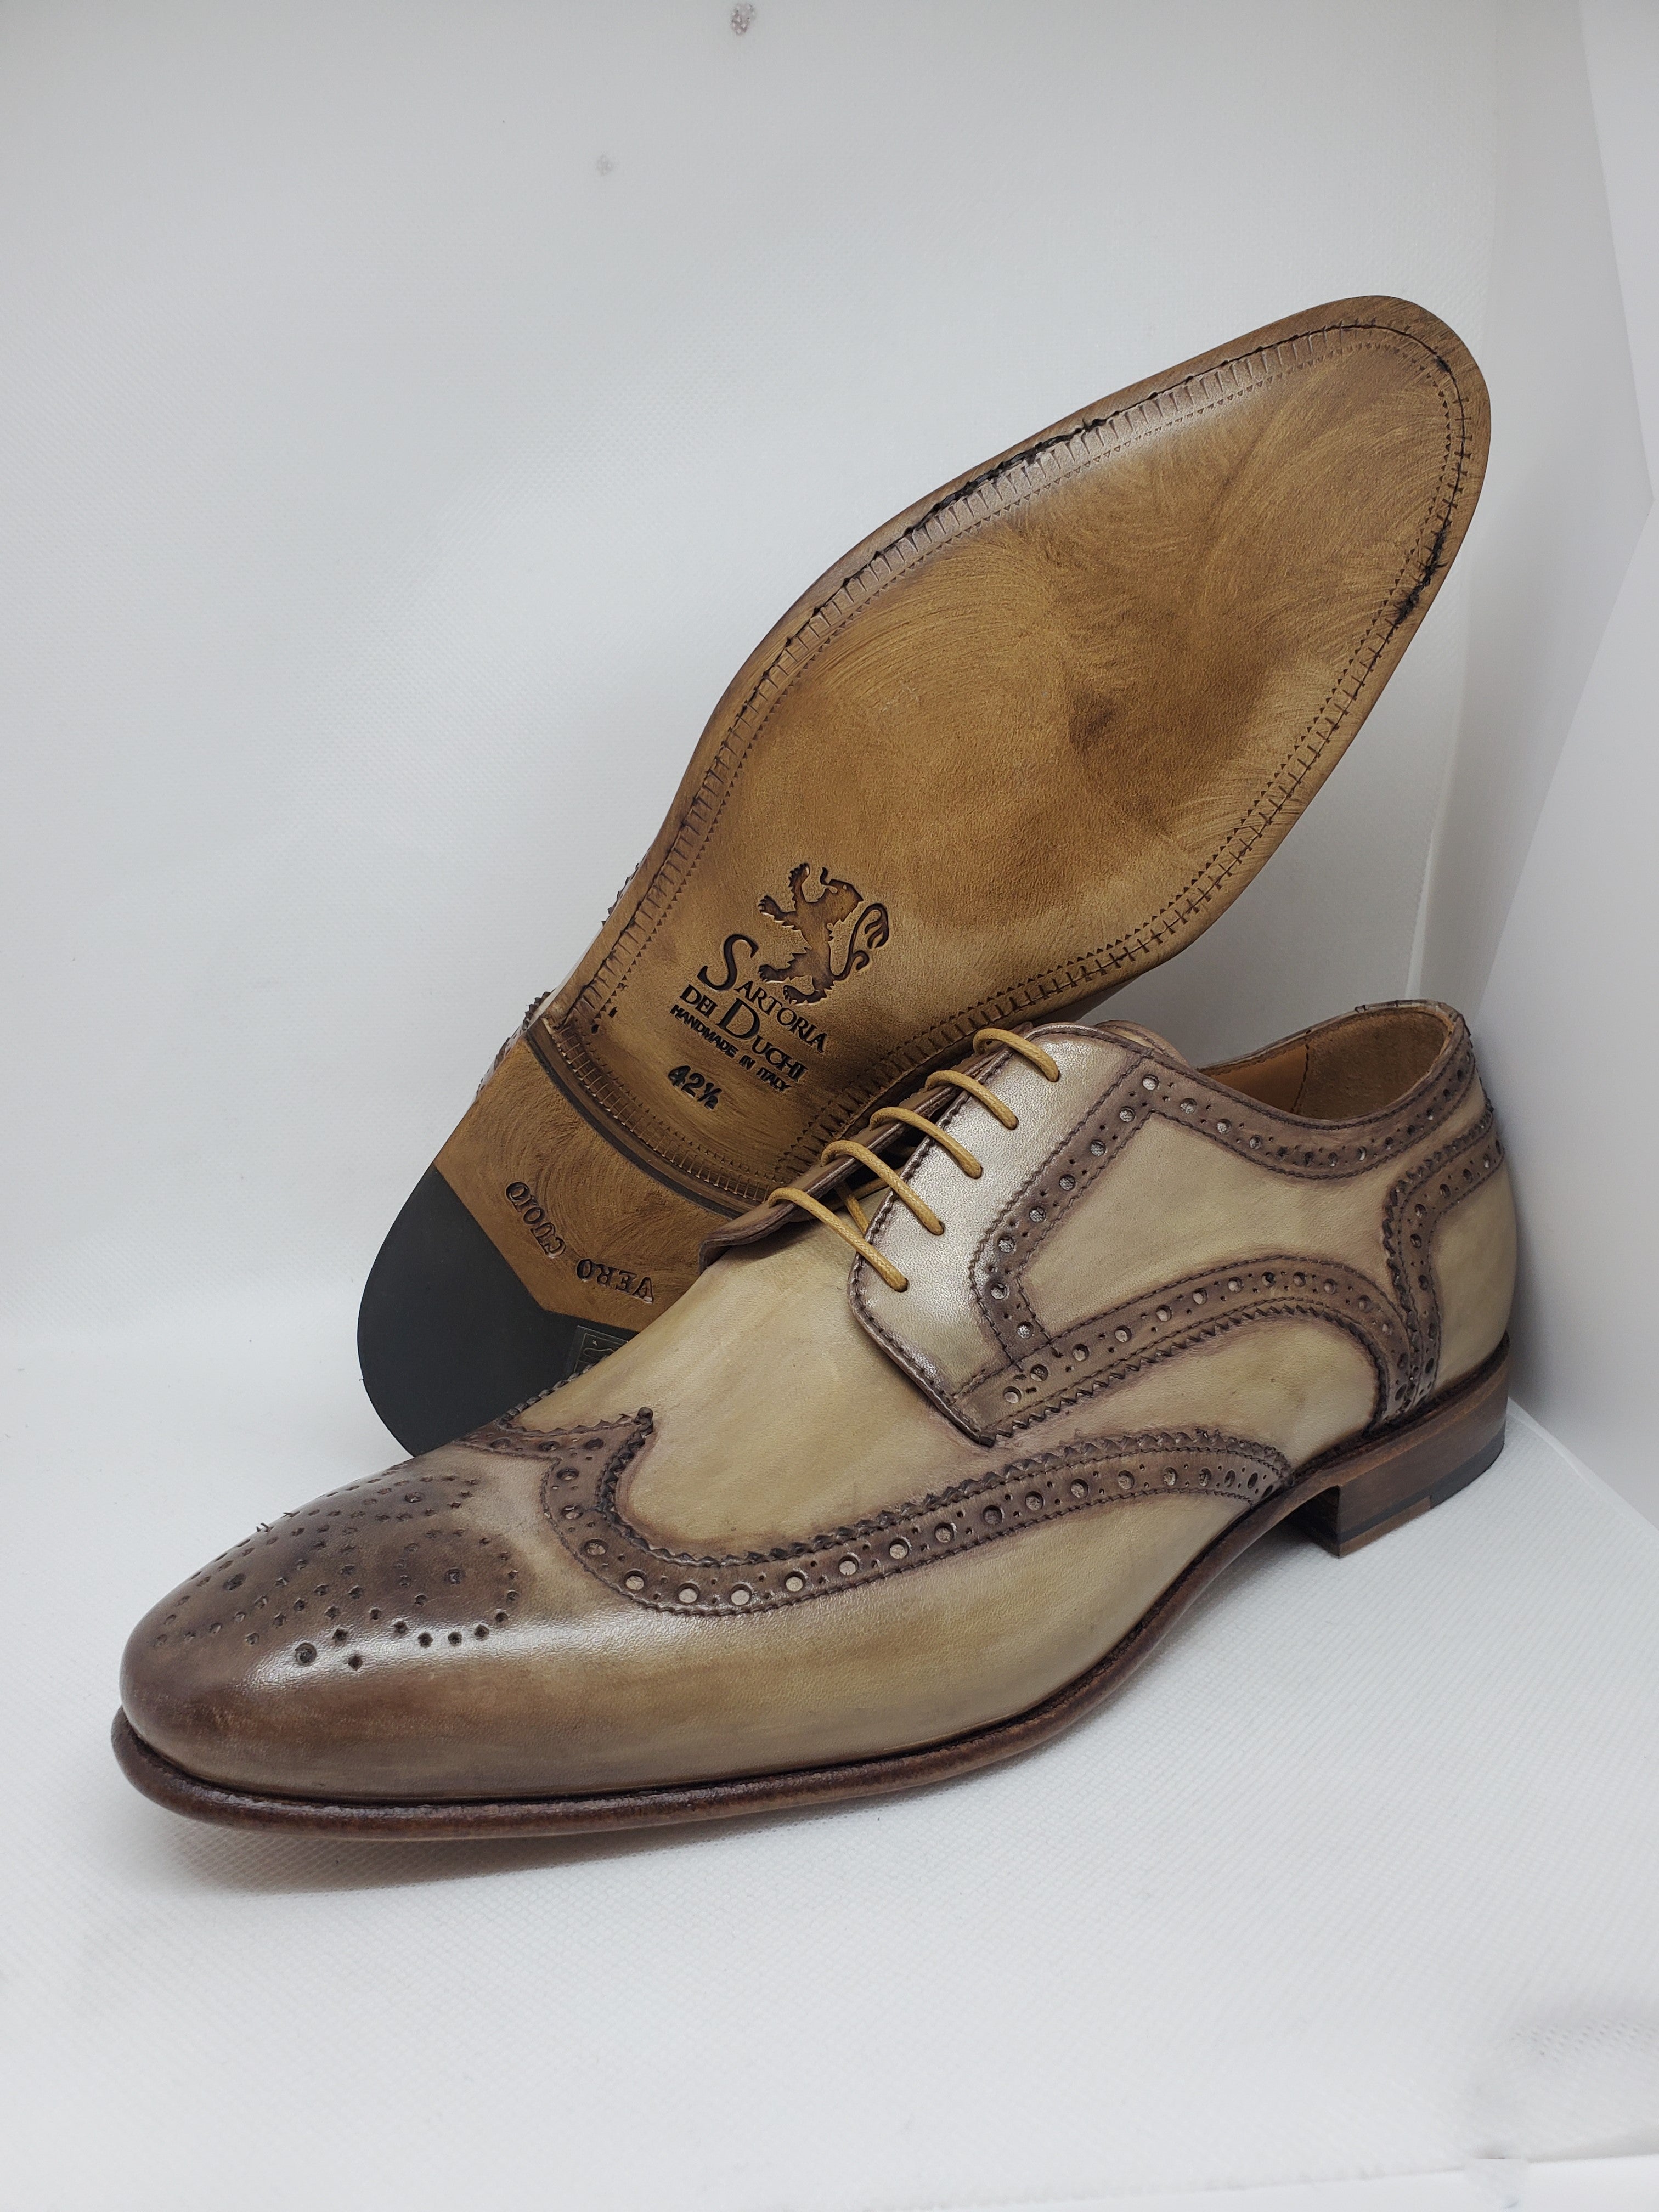 Classic derby shoes 100% made in Italy with Blake stitching, made with crust calfskin and hand antiqued and colored.The Blake process the shoe is mounted on the shoe tree, and a machine called &quot;Blake&quot; the sole is sewn to the insole and the upper. This procedure guarantees the high quality seal of the fund.A classic refined shoe, perfect for your everyday occasions. | Sartoria Dei Duchi - Atri